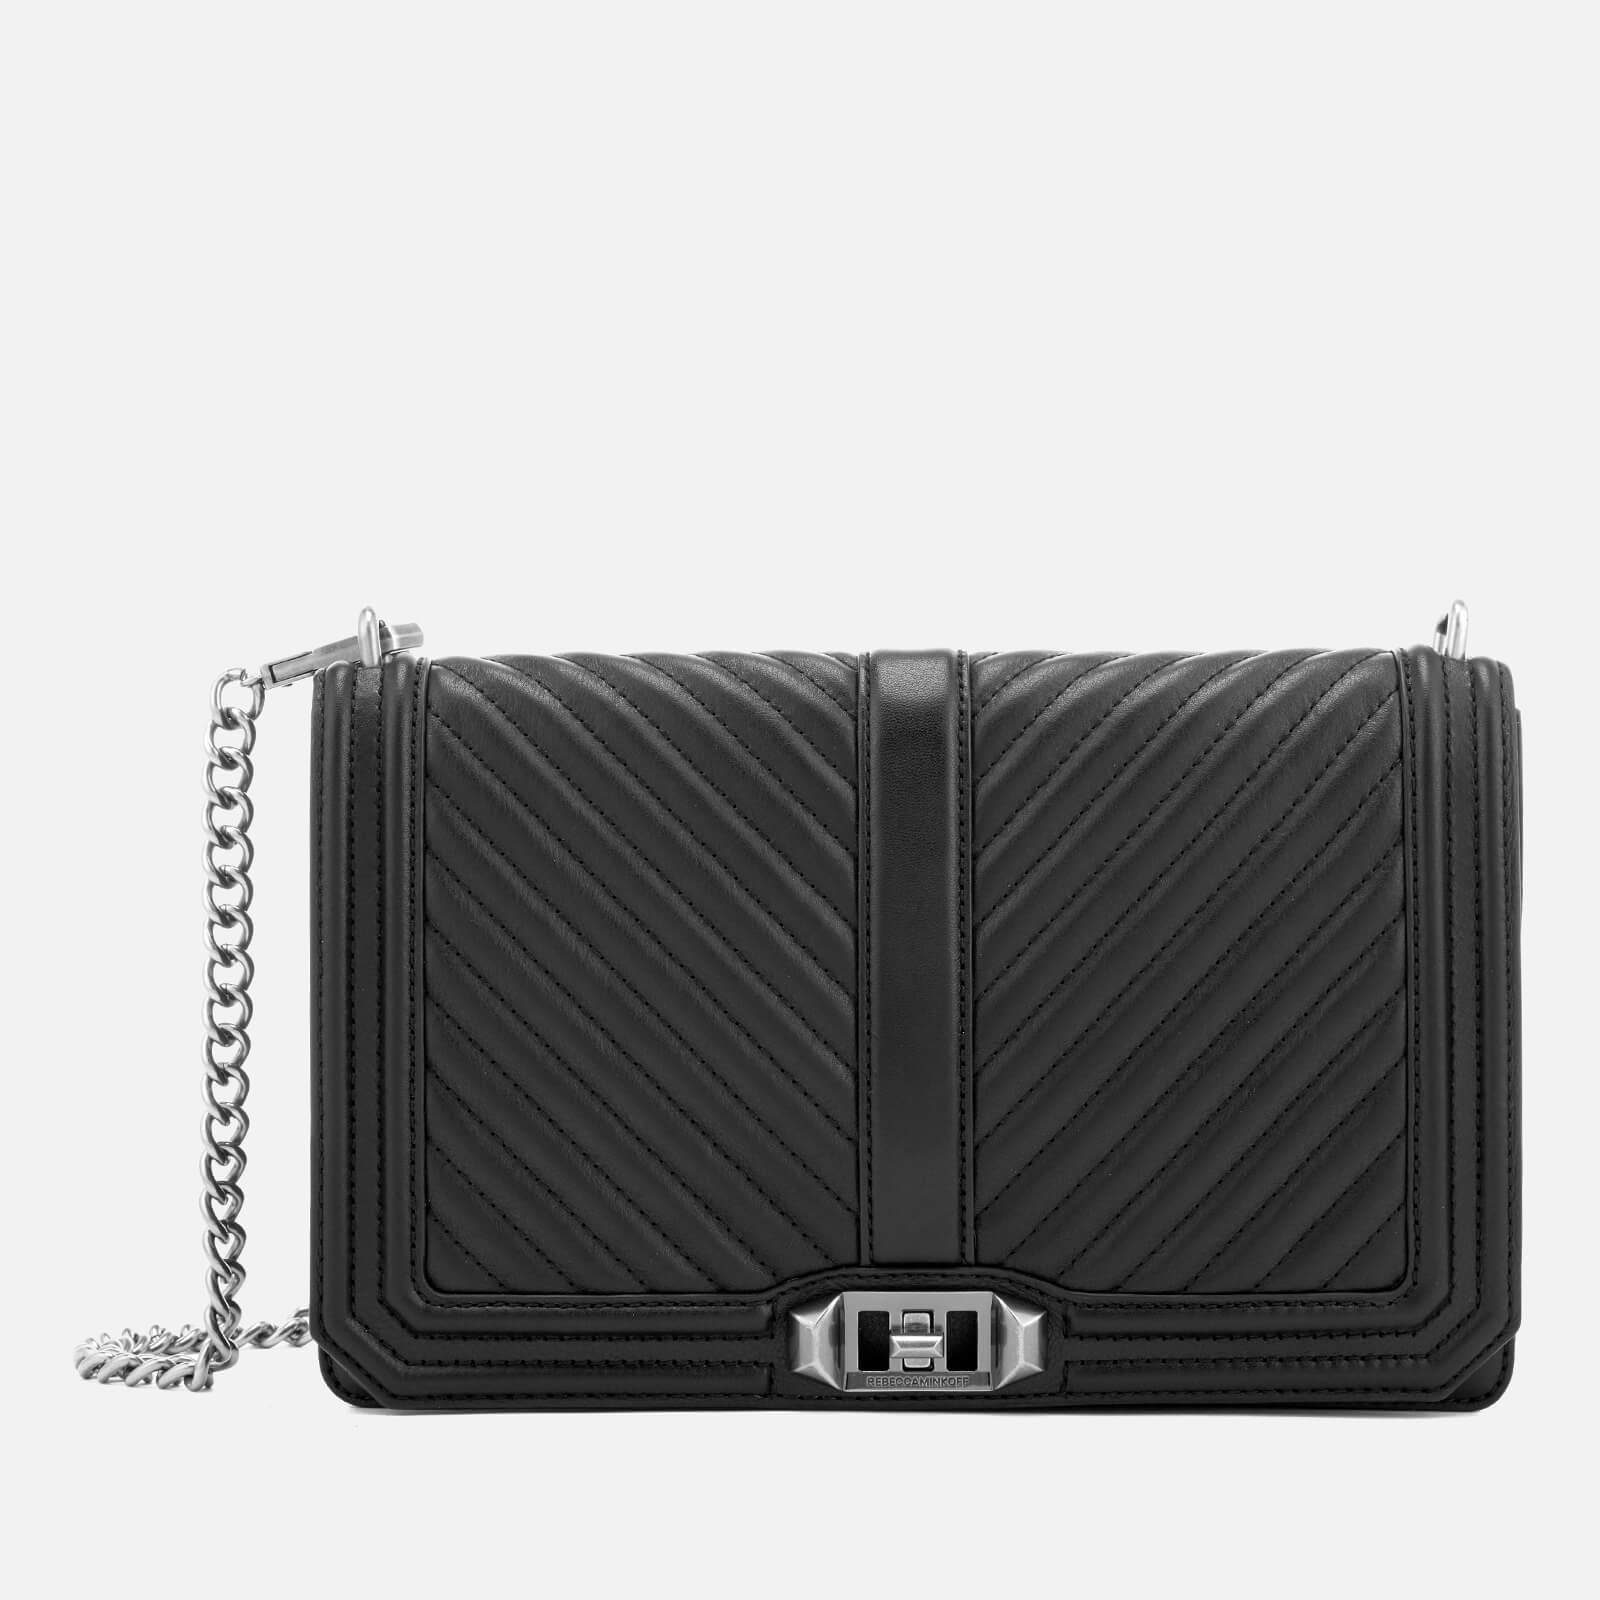 Rebecca Minkoff Leather Chevron Quilted Slim Love Cross Body Bag in Black |  Lyst